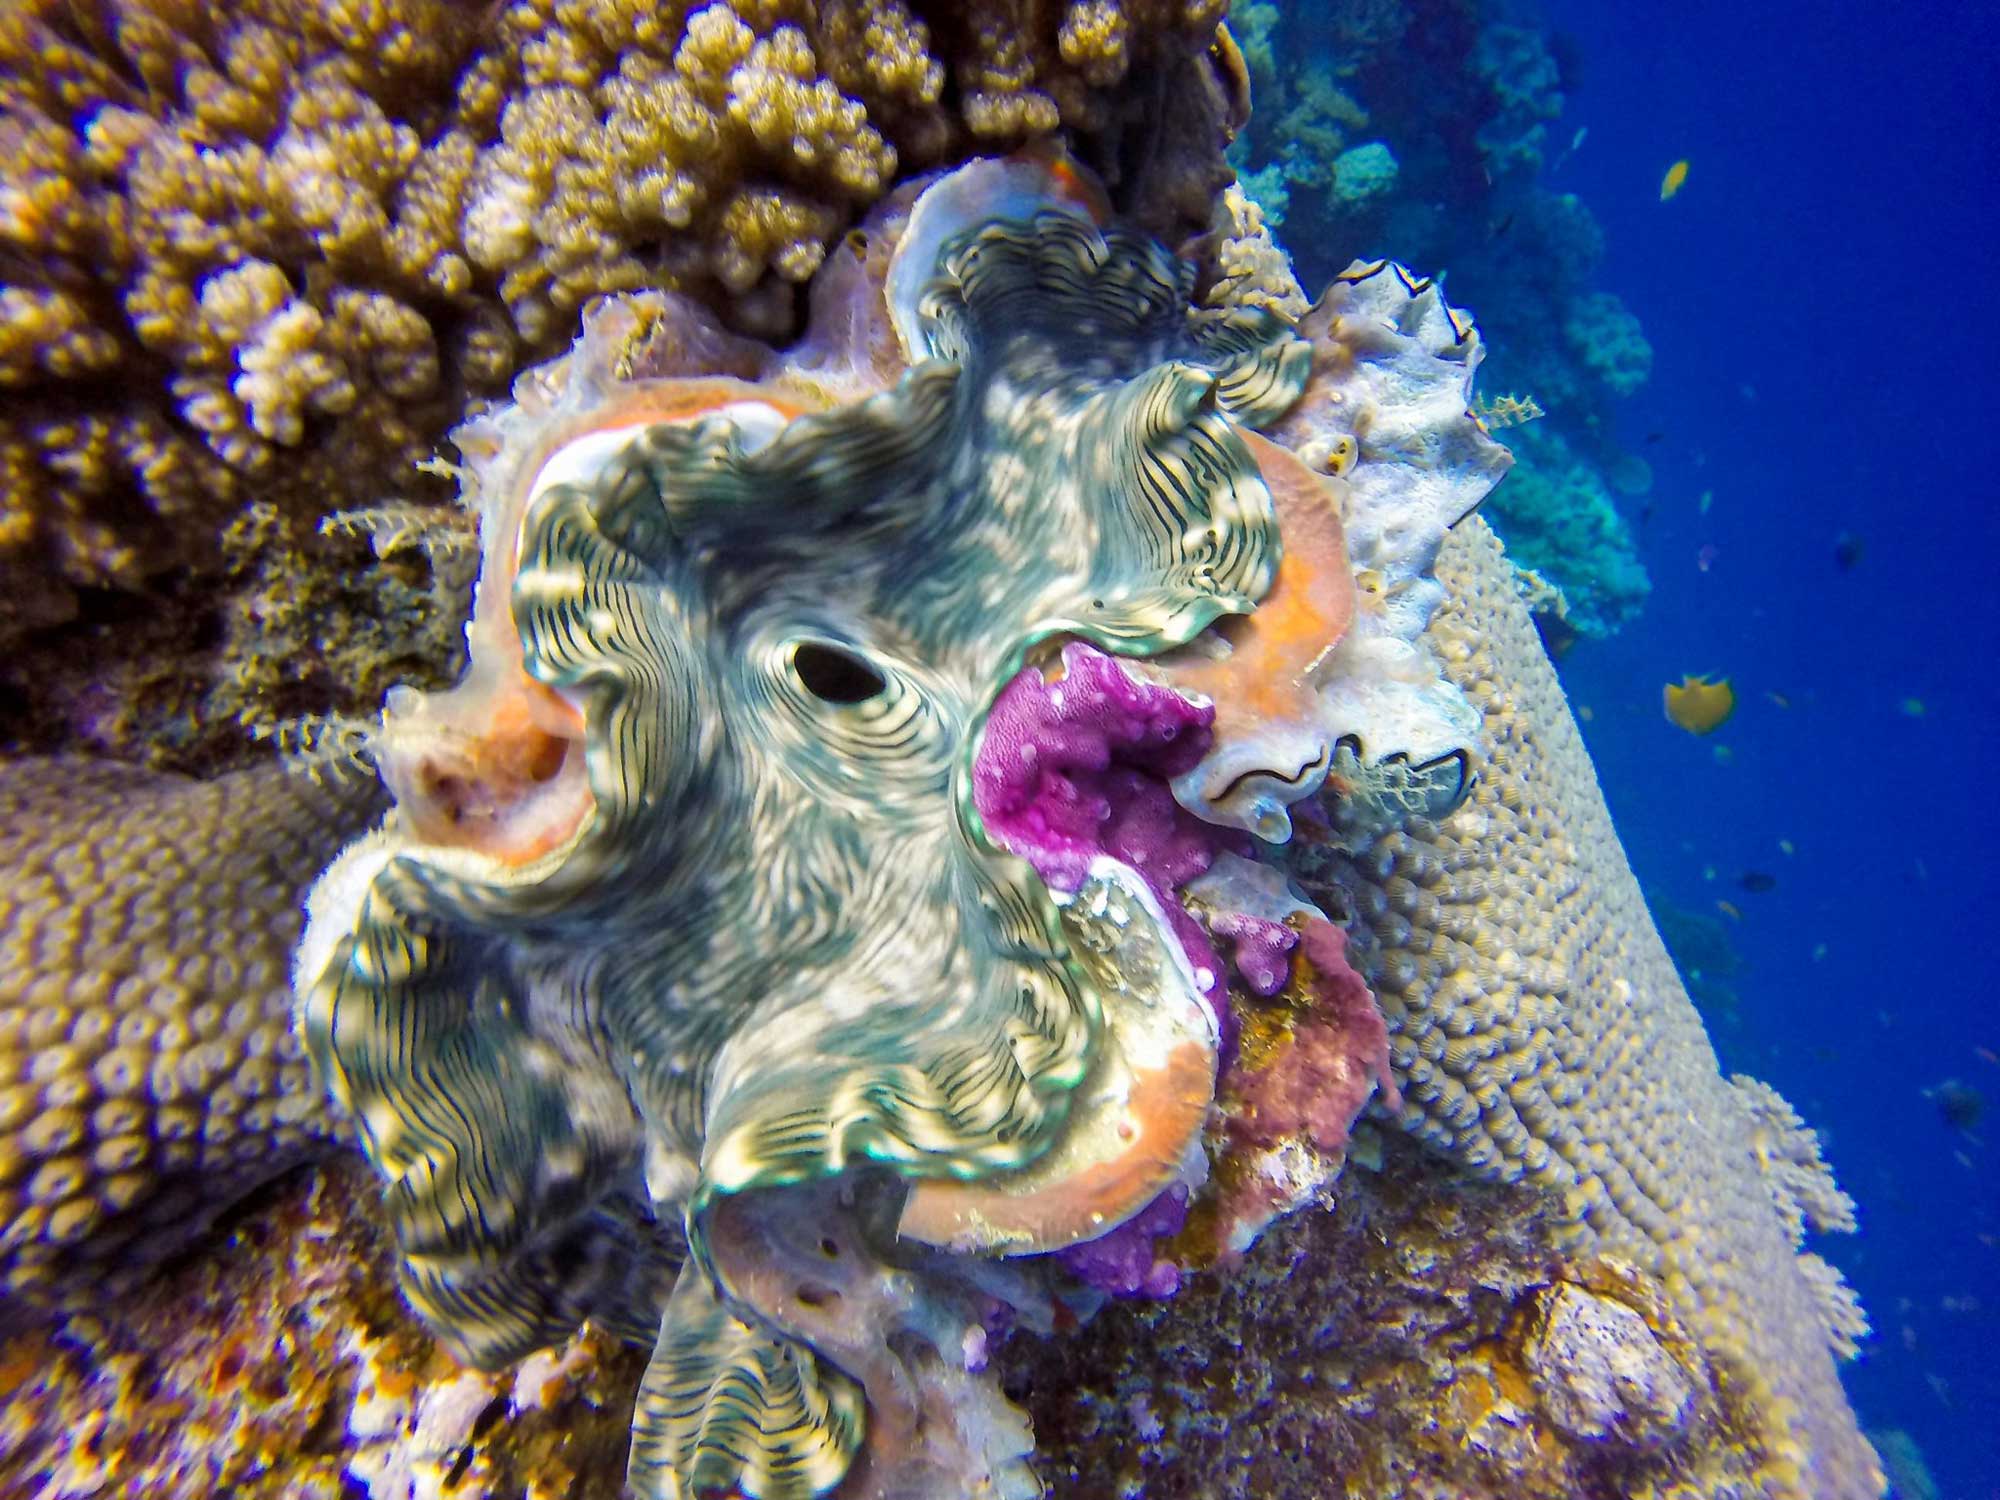 Photograph of a live giant clam.